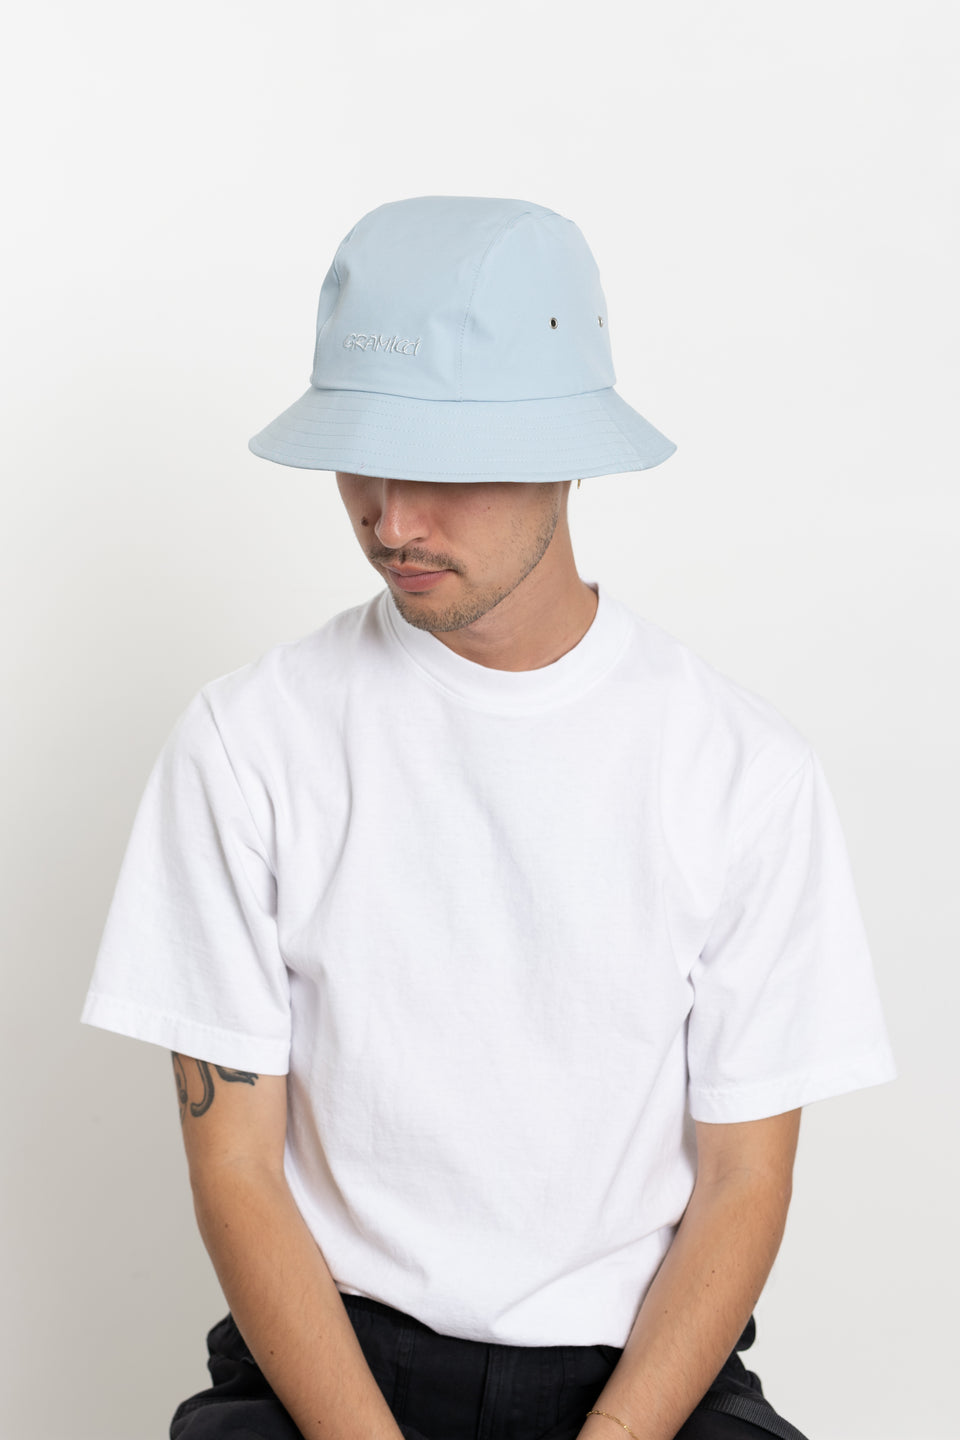 Gramicci Japan FW23 Men's Collection Waterproof 3L DWR Laminated Bucket Hat Sky Blue Calculus Victoria BC Canada